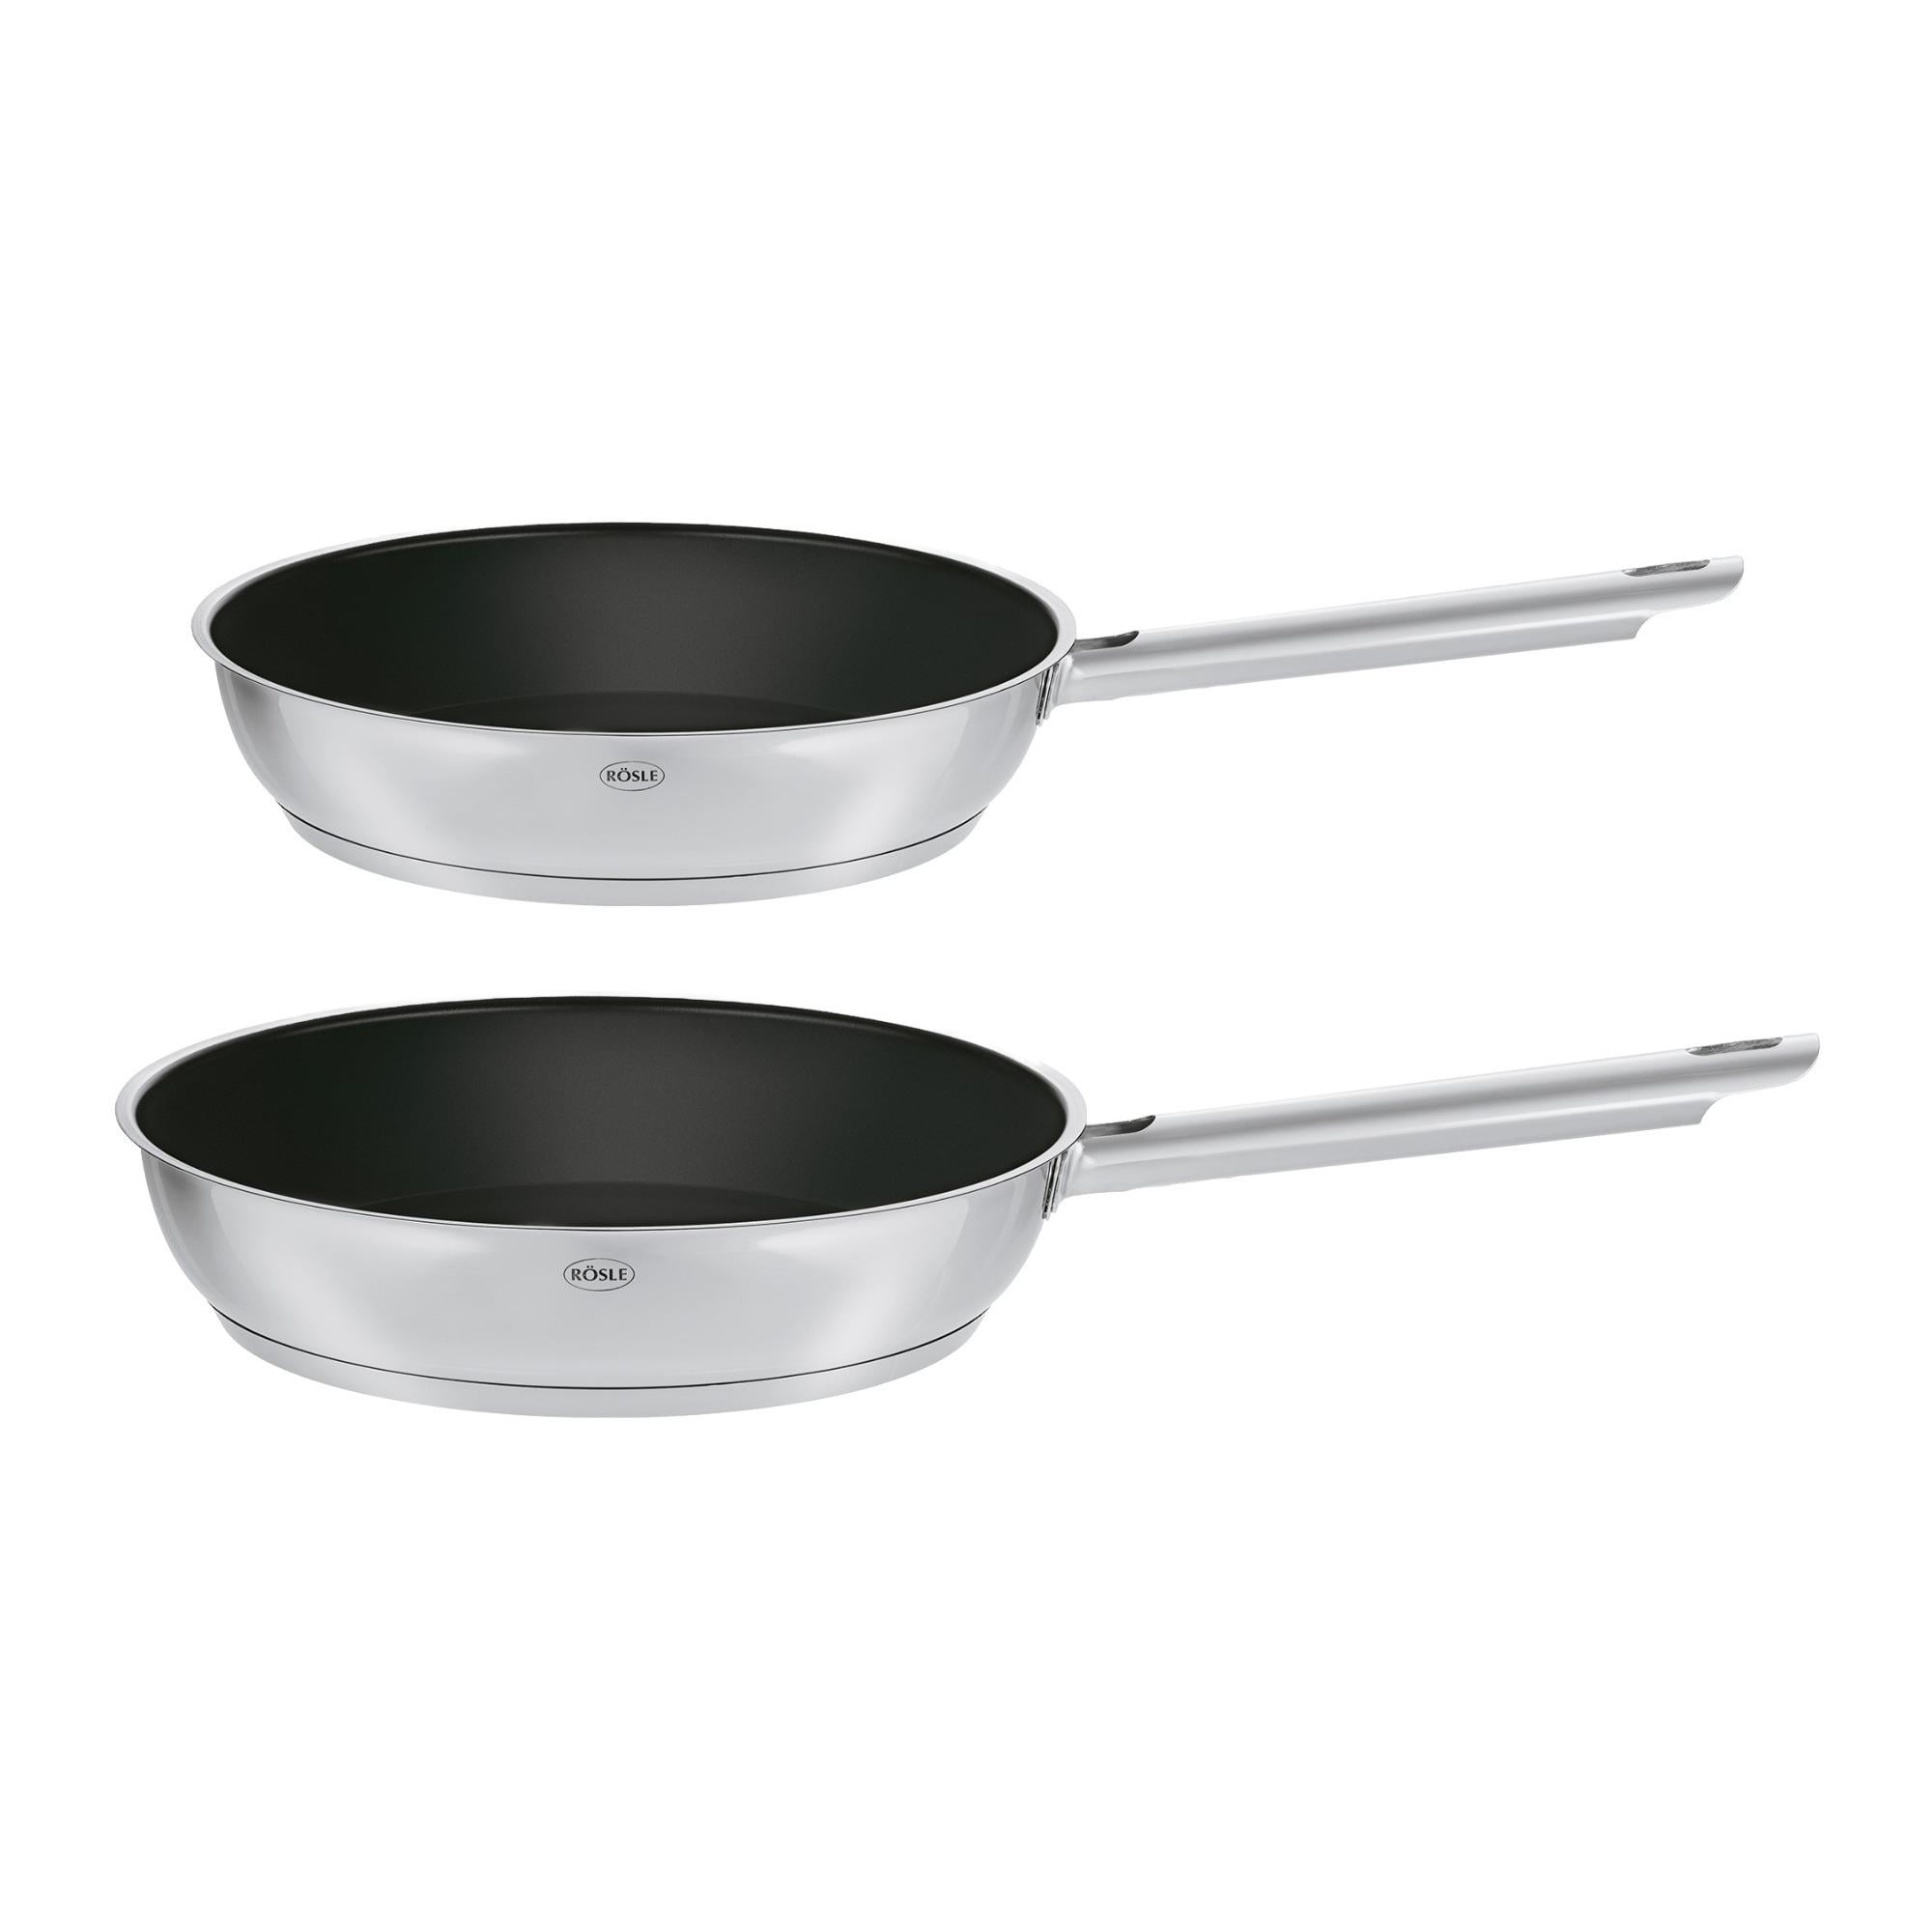 18/10 Stainless Steel RÖSLE Elegance 2-Piece Frying Pan Set Suitable for Induction Cookers High-Quality Universal Pans with Robust ProCera Non-Stick Sealant 20 cm and 28 cm 